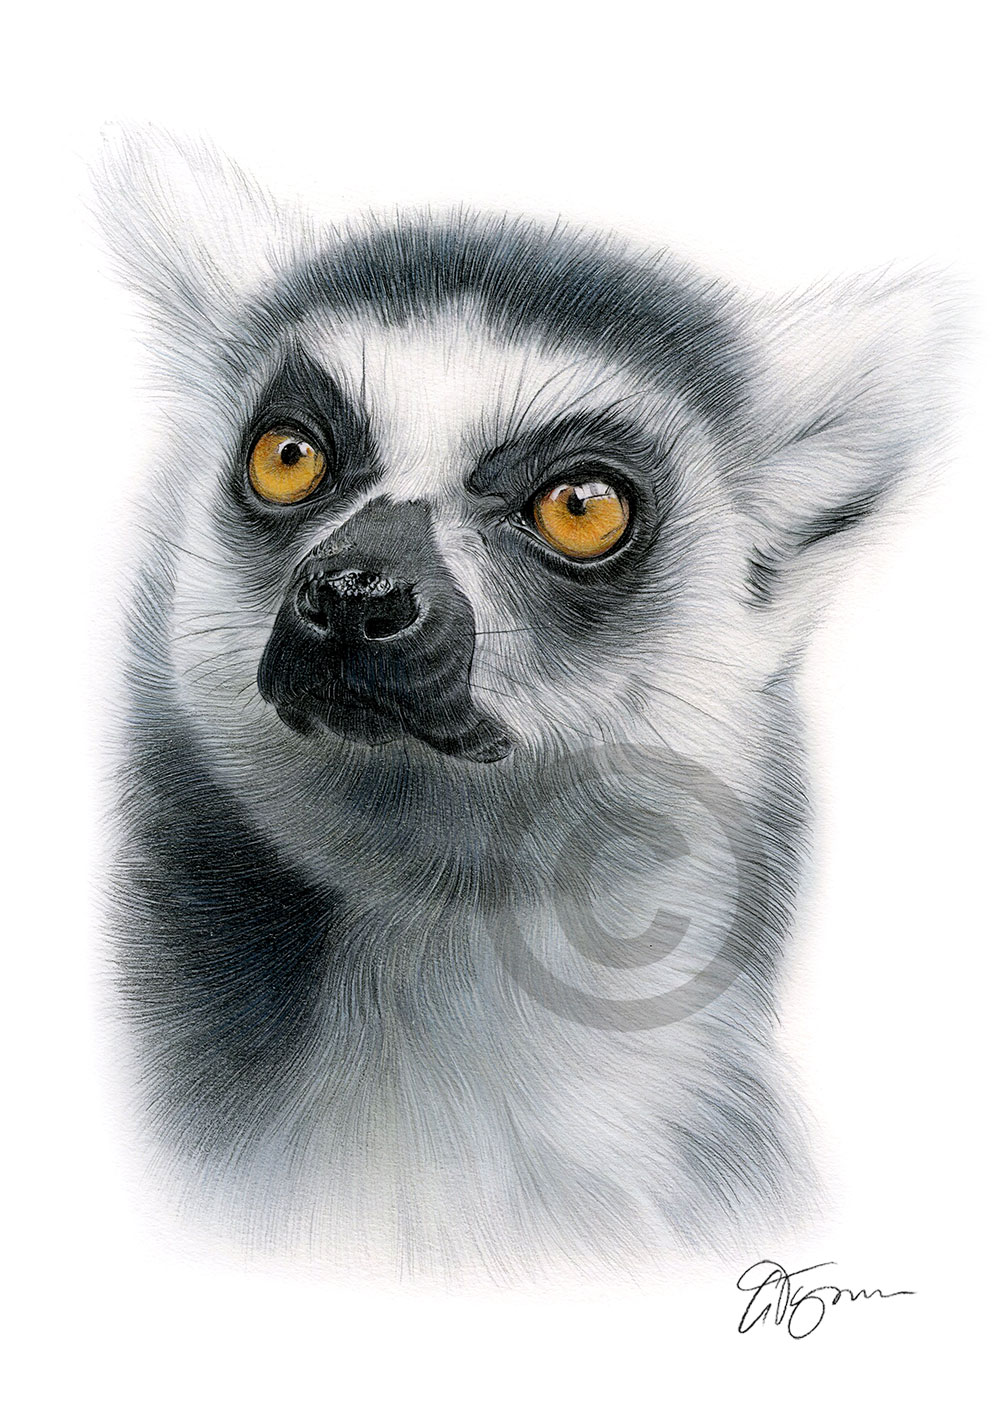 Colour pencil drawing of a ring-tailed lemur by artist Gary Tymon